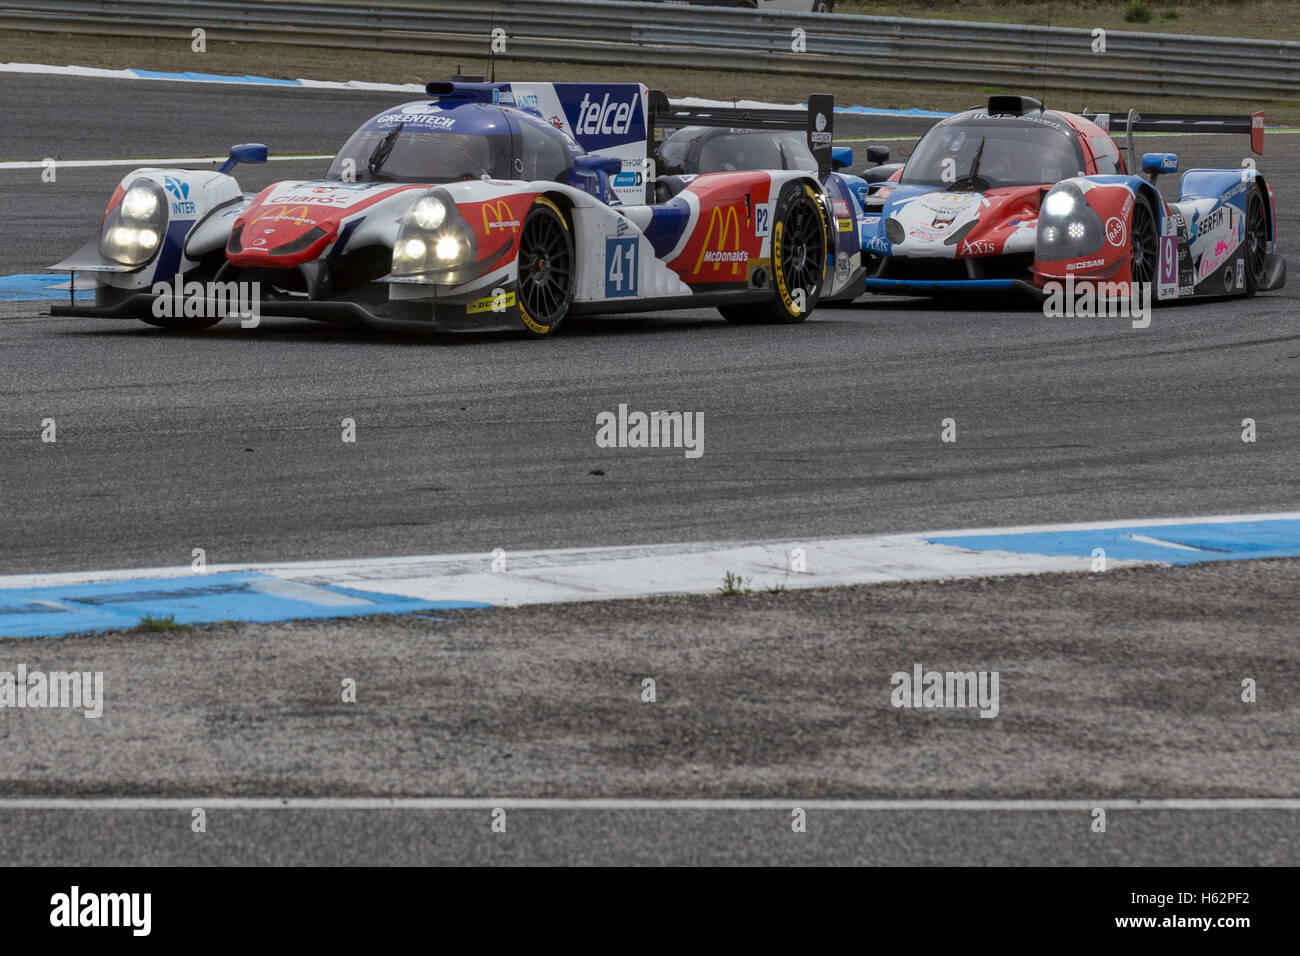 October 23, 2016. Estoril, Portugal. The #41 LMP2 Ligier JS P2 - Nissan, driven by Memo Rojas (MEX), Julien Canal (FRA) and Nathanael Berthon (FRA) (L) and The #9 LMP3 Ligier JS P3 - Nissan, driven by Eric Trouillet (FRA), Paul Petit (FRA) and Enzo Guibbert (FRA) (R) during the Race of European Le Mans Series, during the European Le Mans Series Week-End Estoril Credit:  Alexandre de Sousa/Alamy Live News Stock Photo